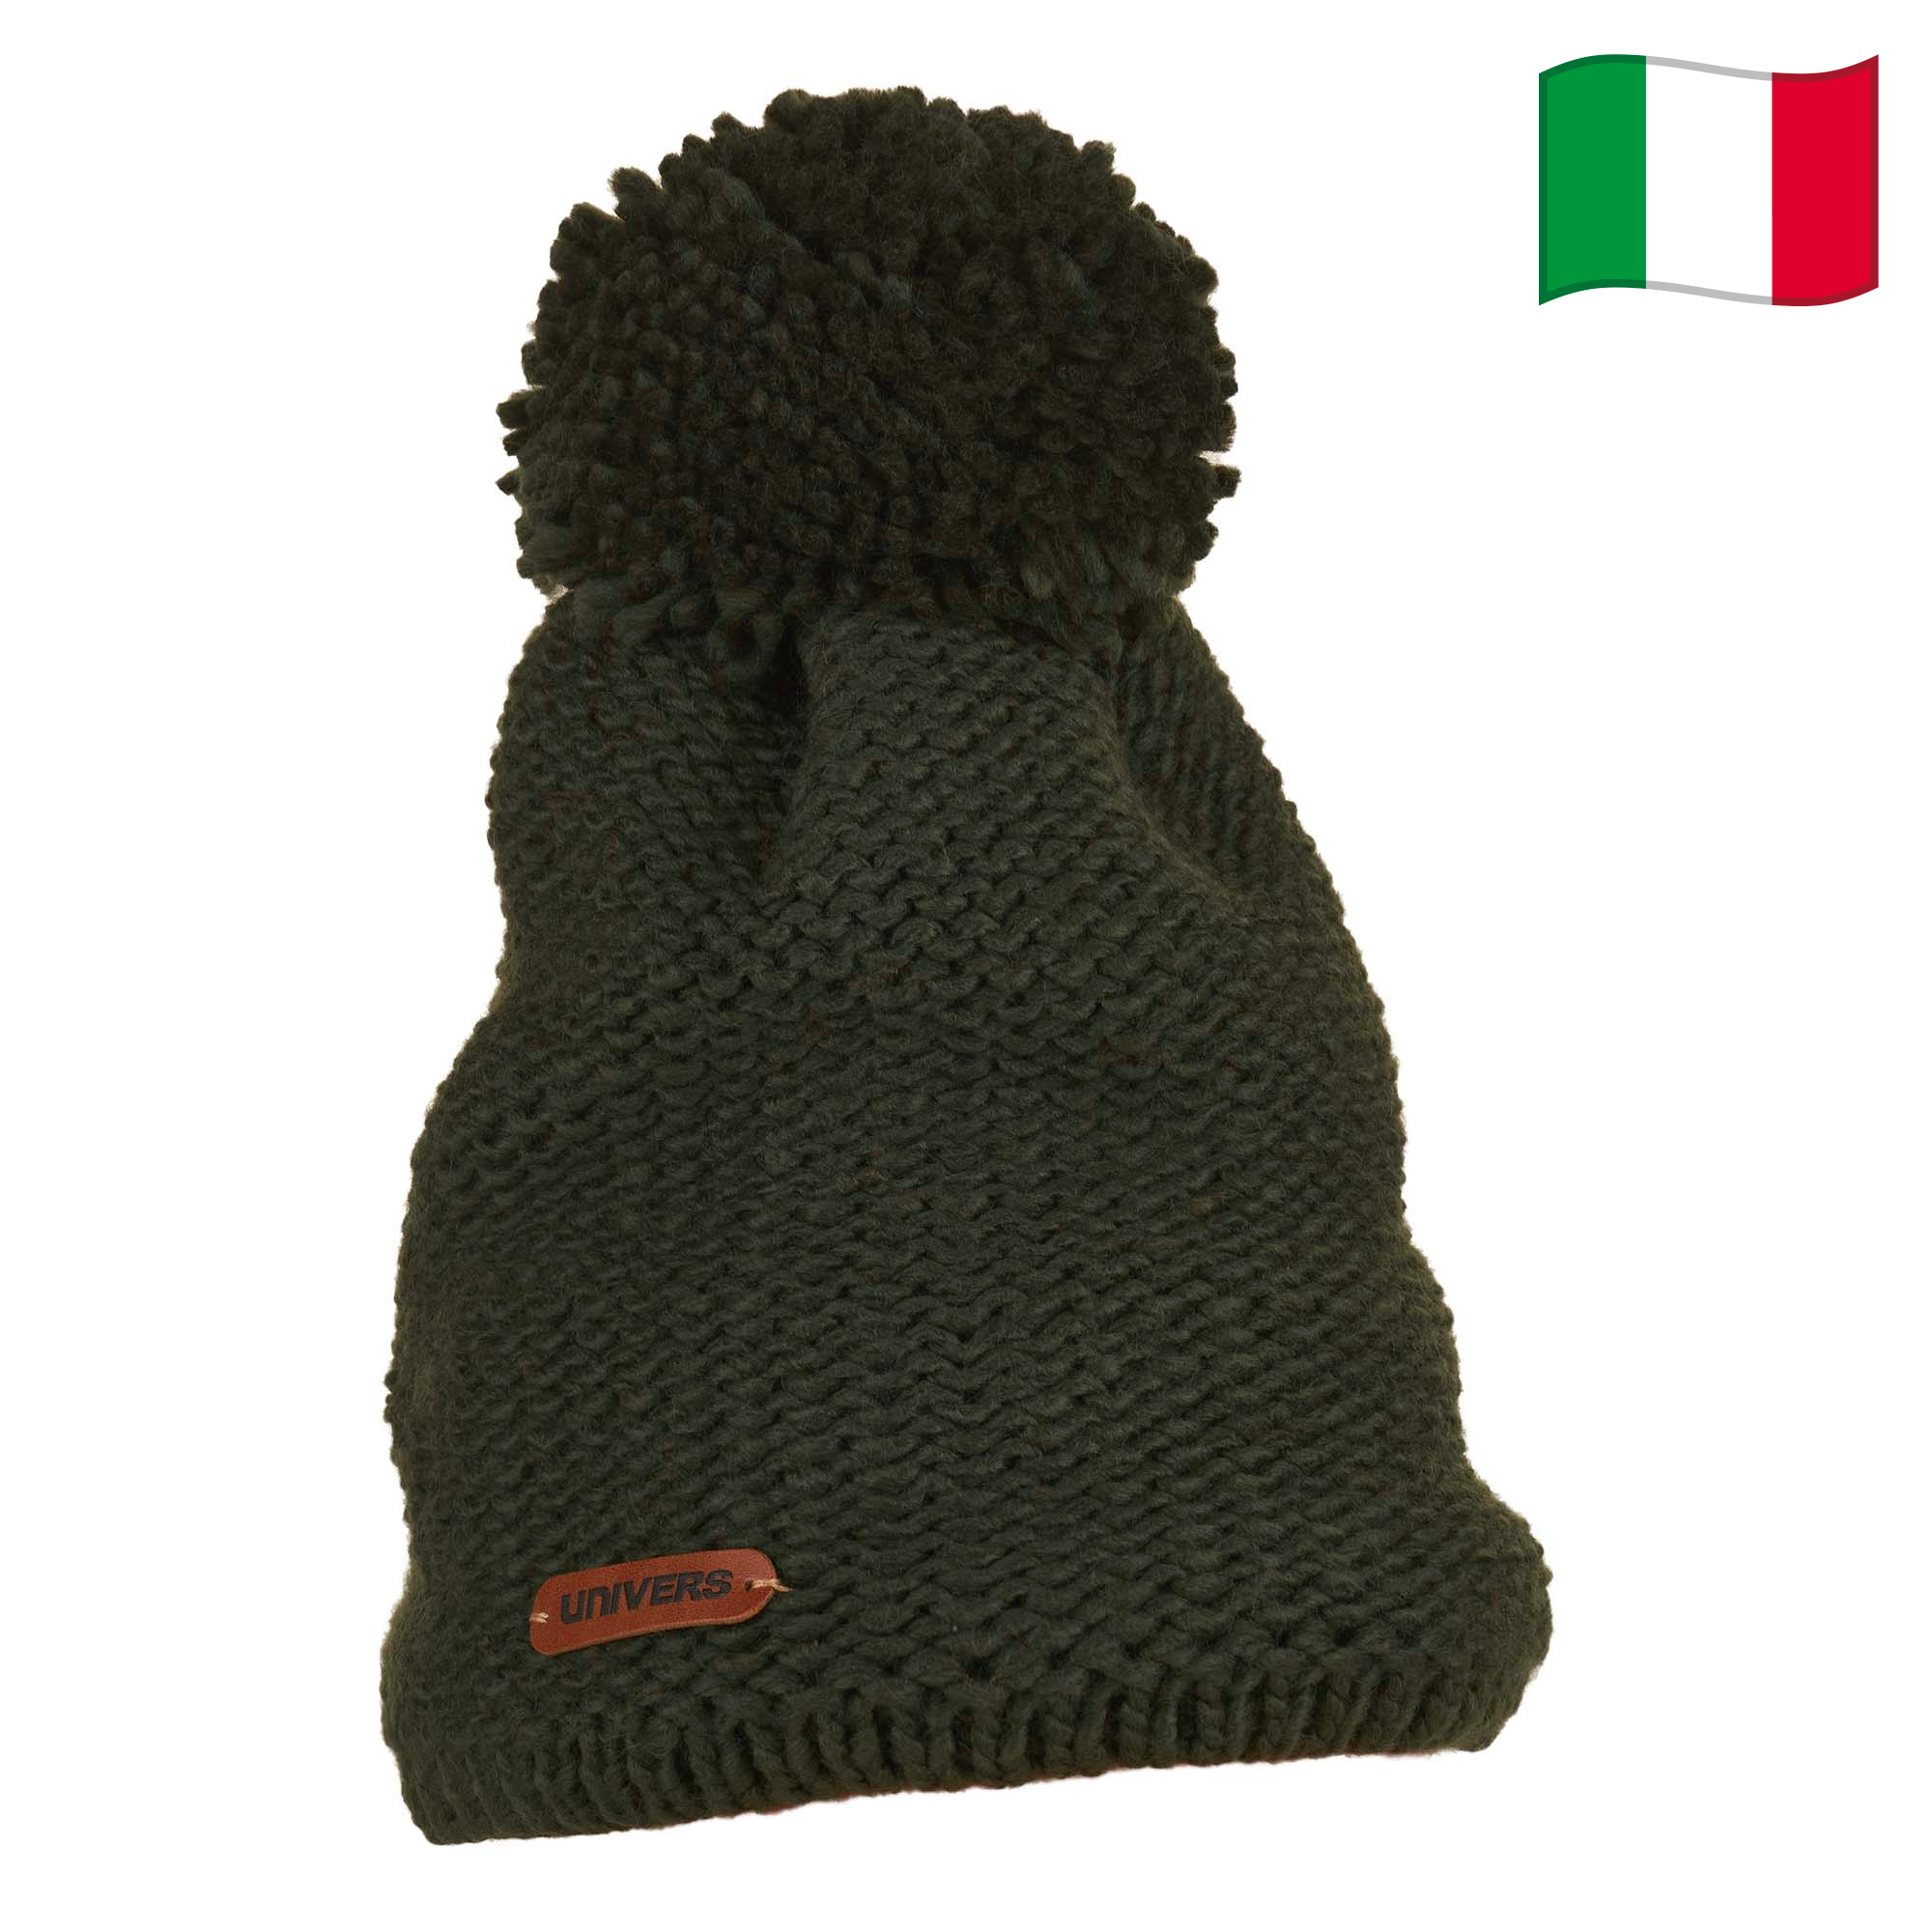 Univers Alpi Men's Knitted Beanie/Toque with Faux Fur Pom (Dark Green)